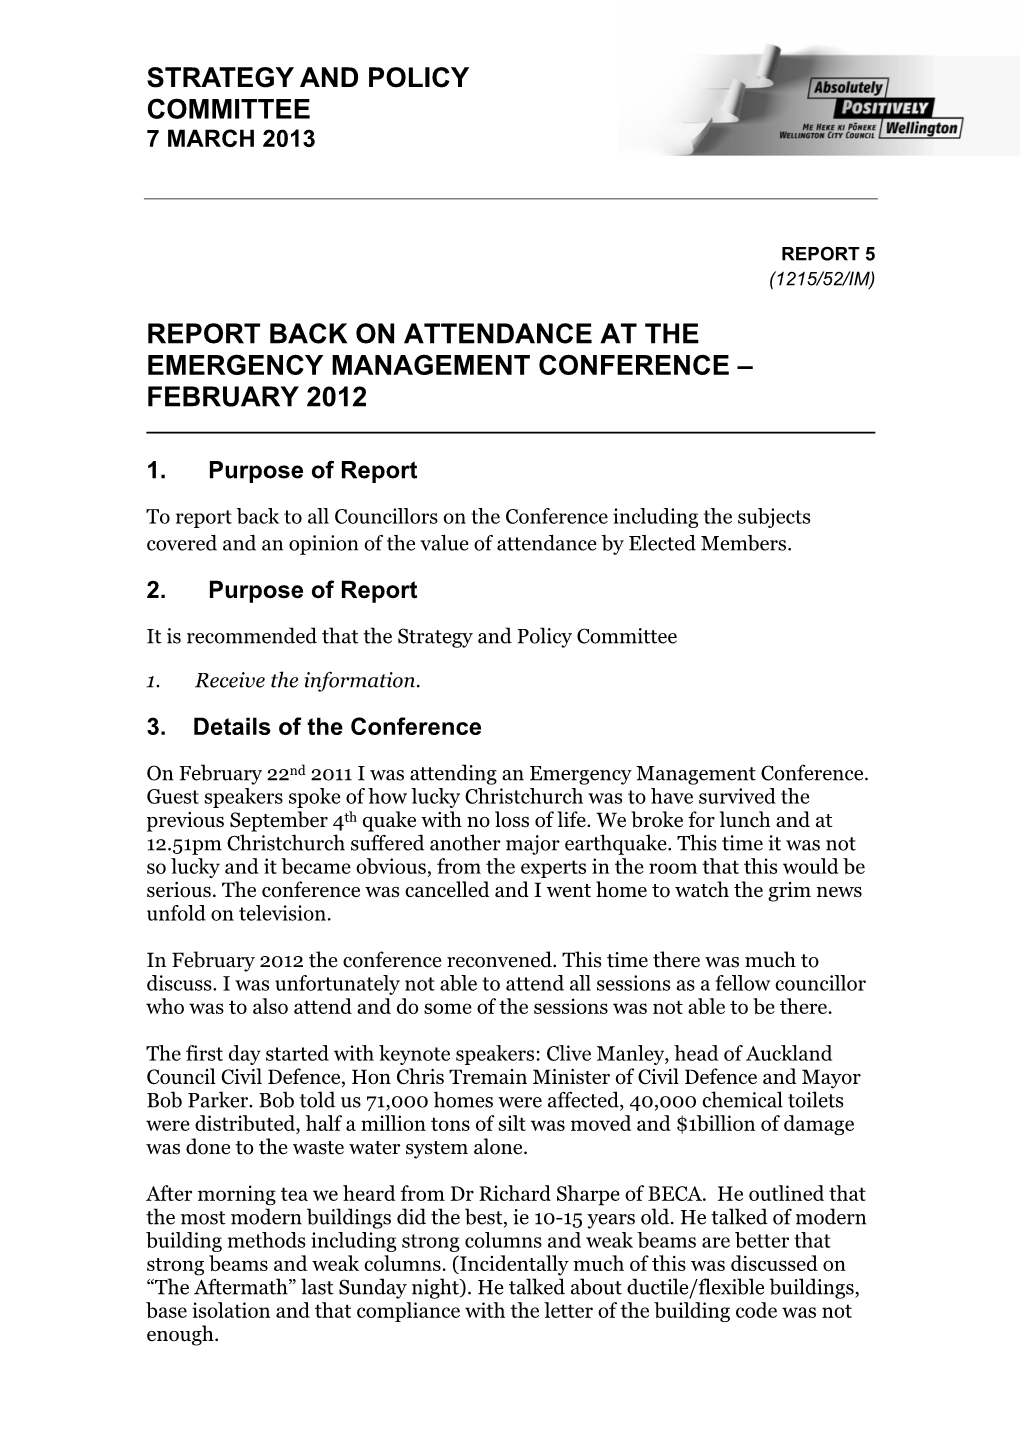 Strategy and Policy Committee Report Back on Attendance at the Emergency Management Conference